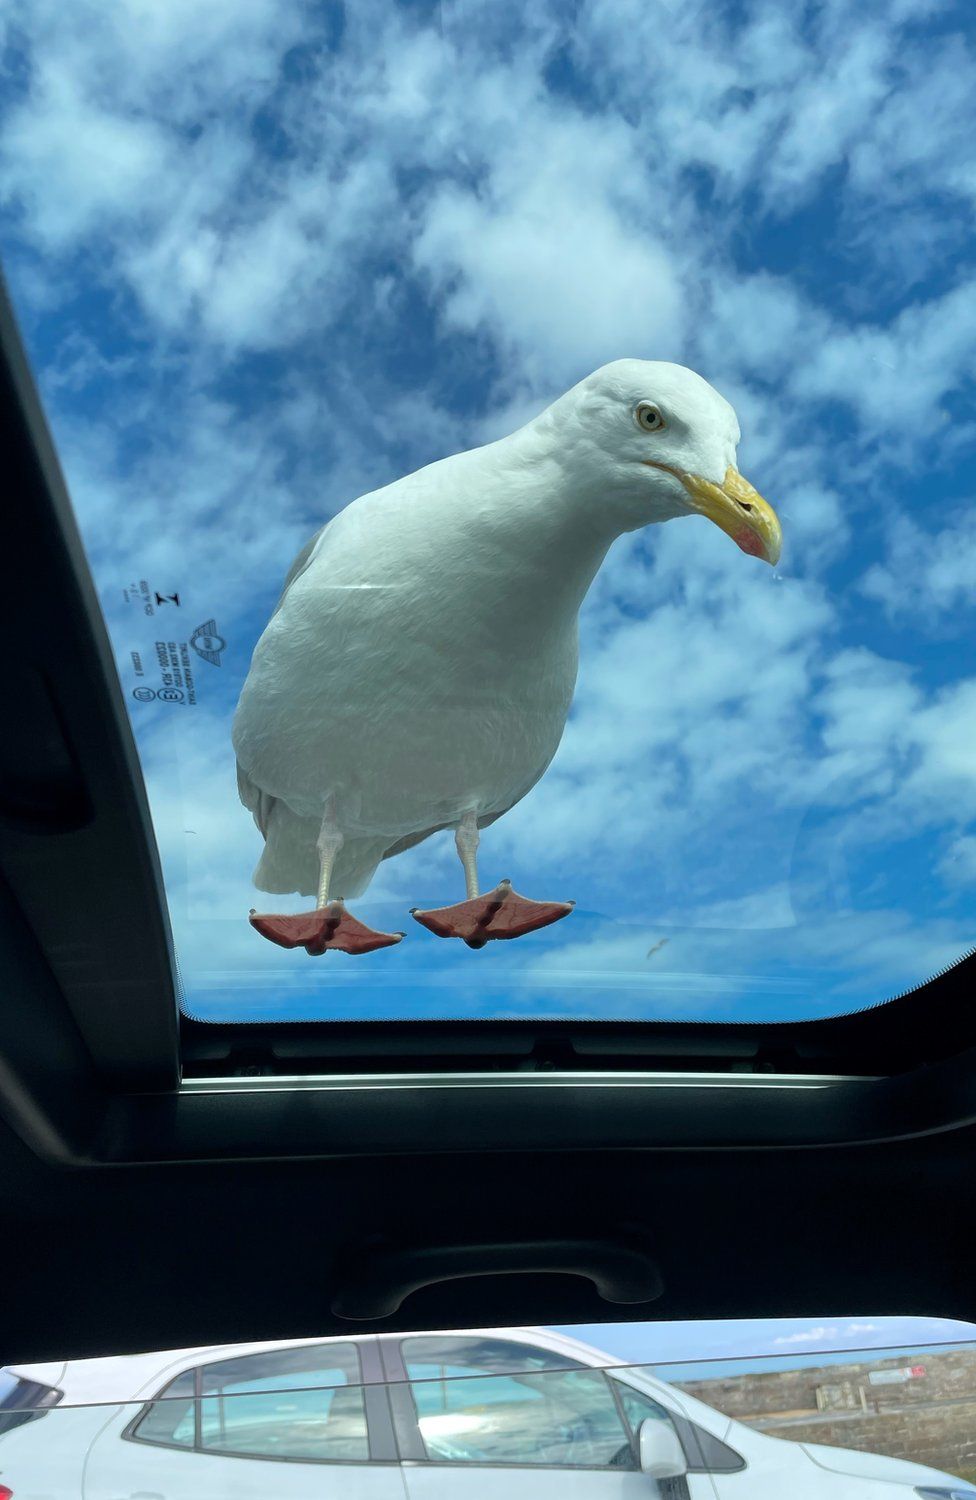 Gull on car roof